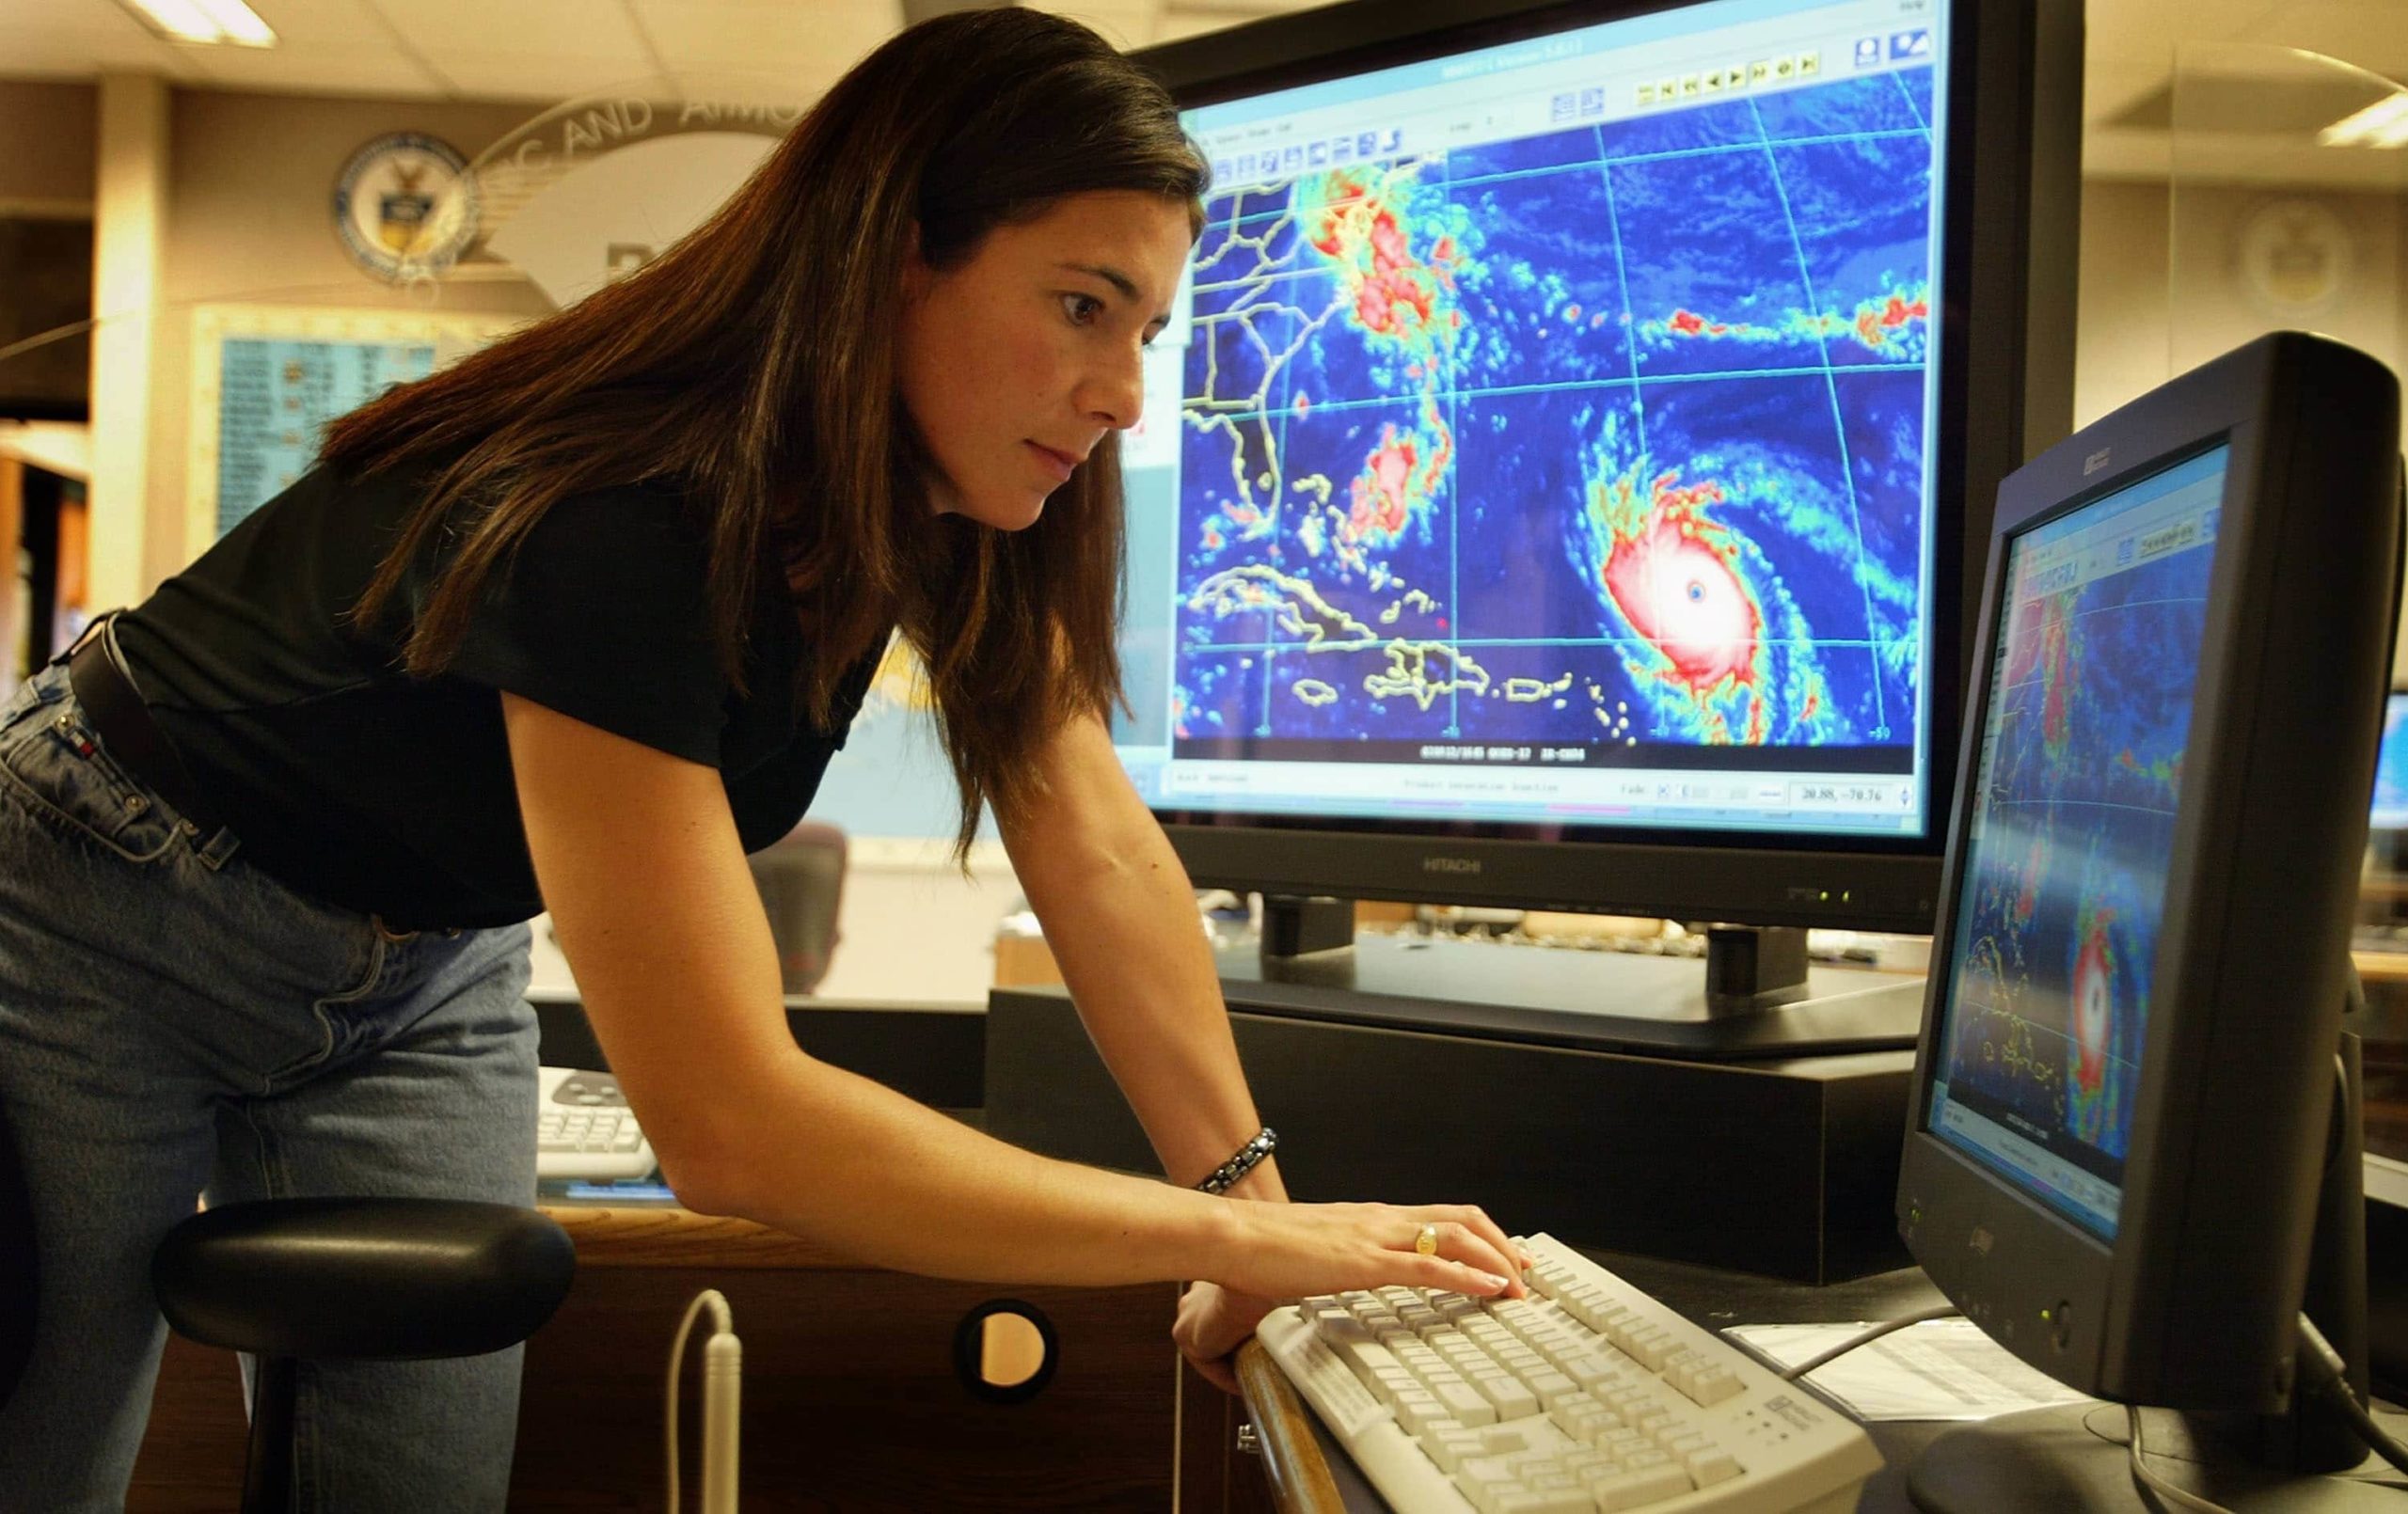 Online courses - Department of Meteorology, University of Reading